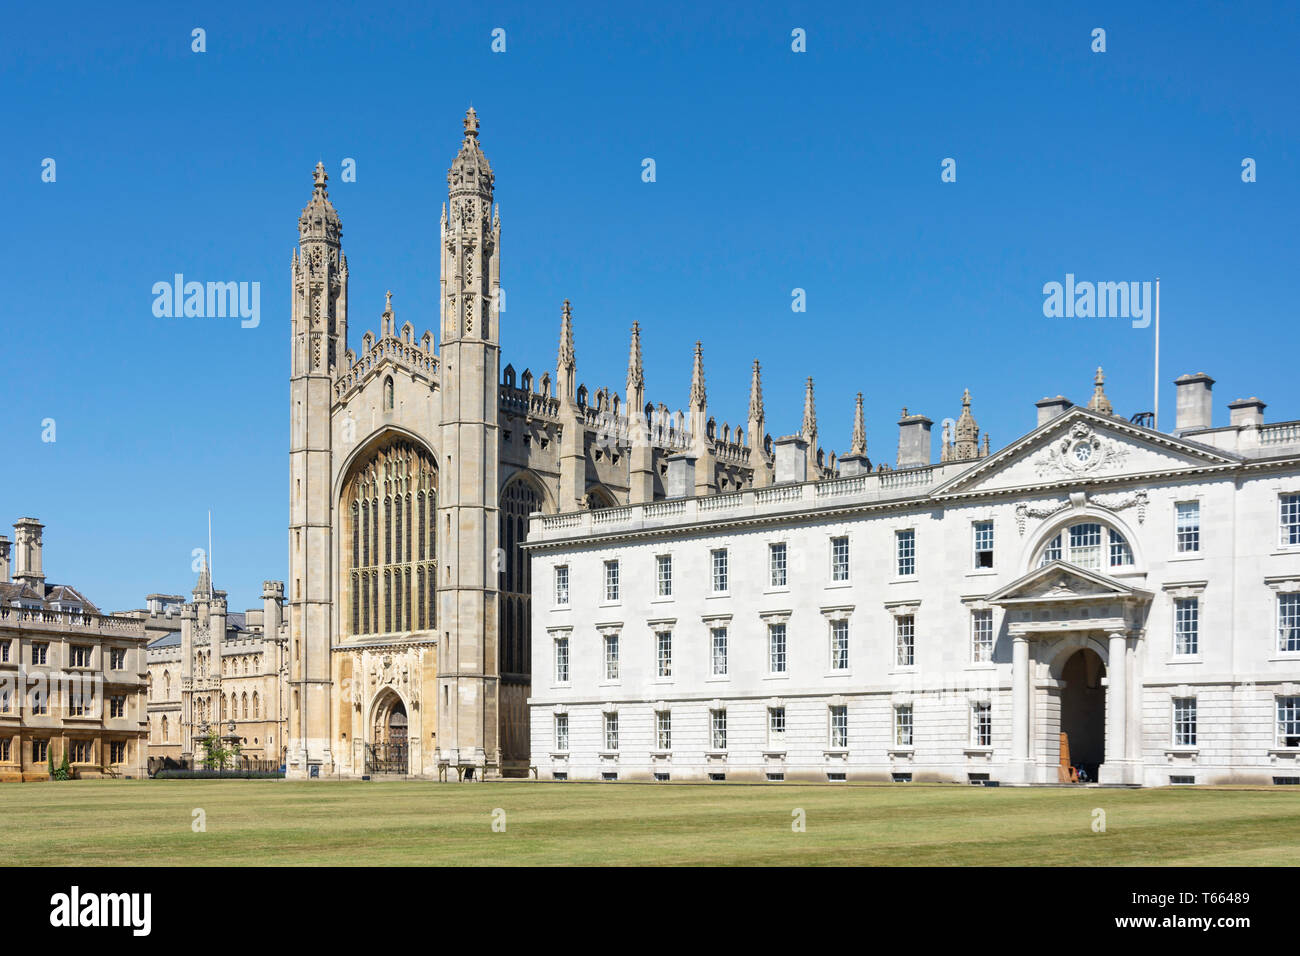 King's College Chapel and the Gibbs' Building, King's College, Cambridge, Cambridgeshire, England, United Kingdom Stock Photo